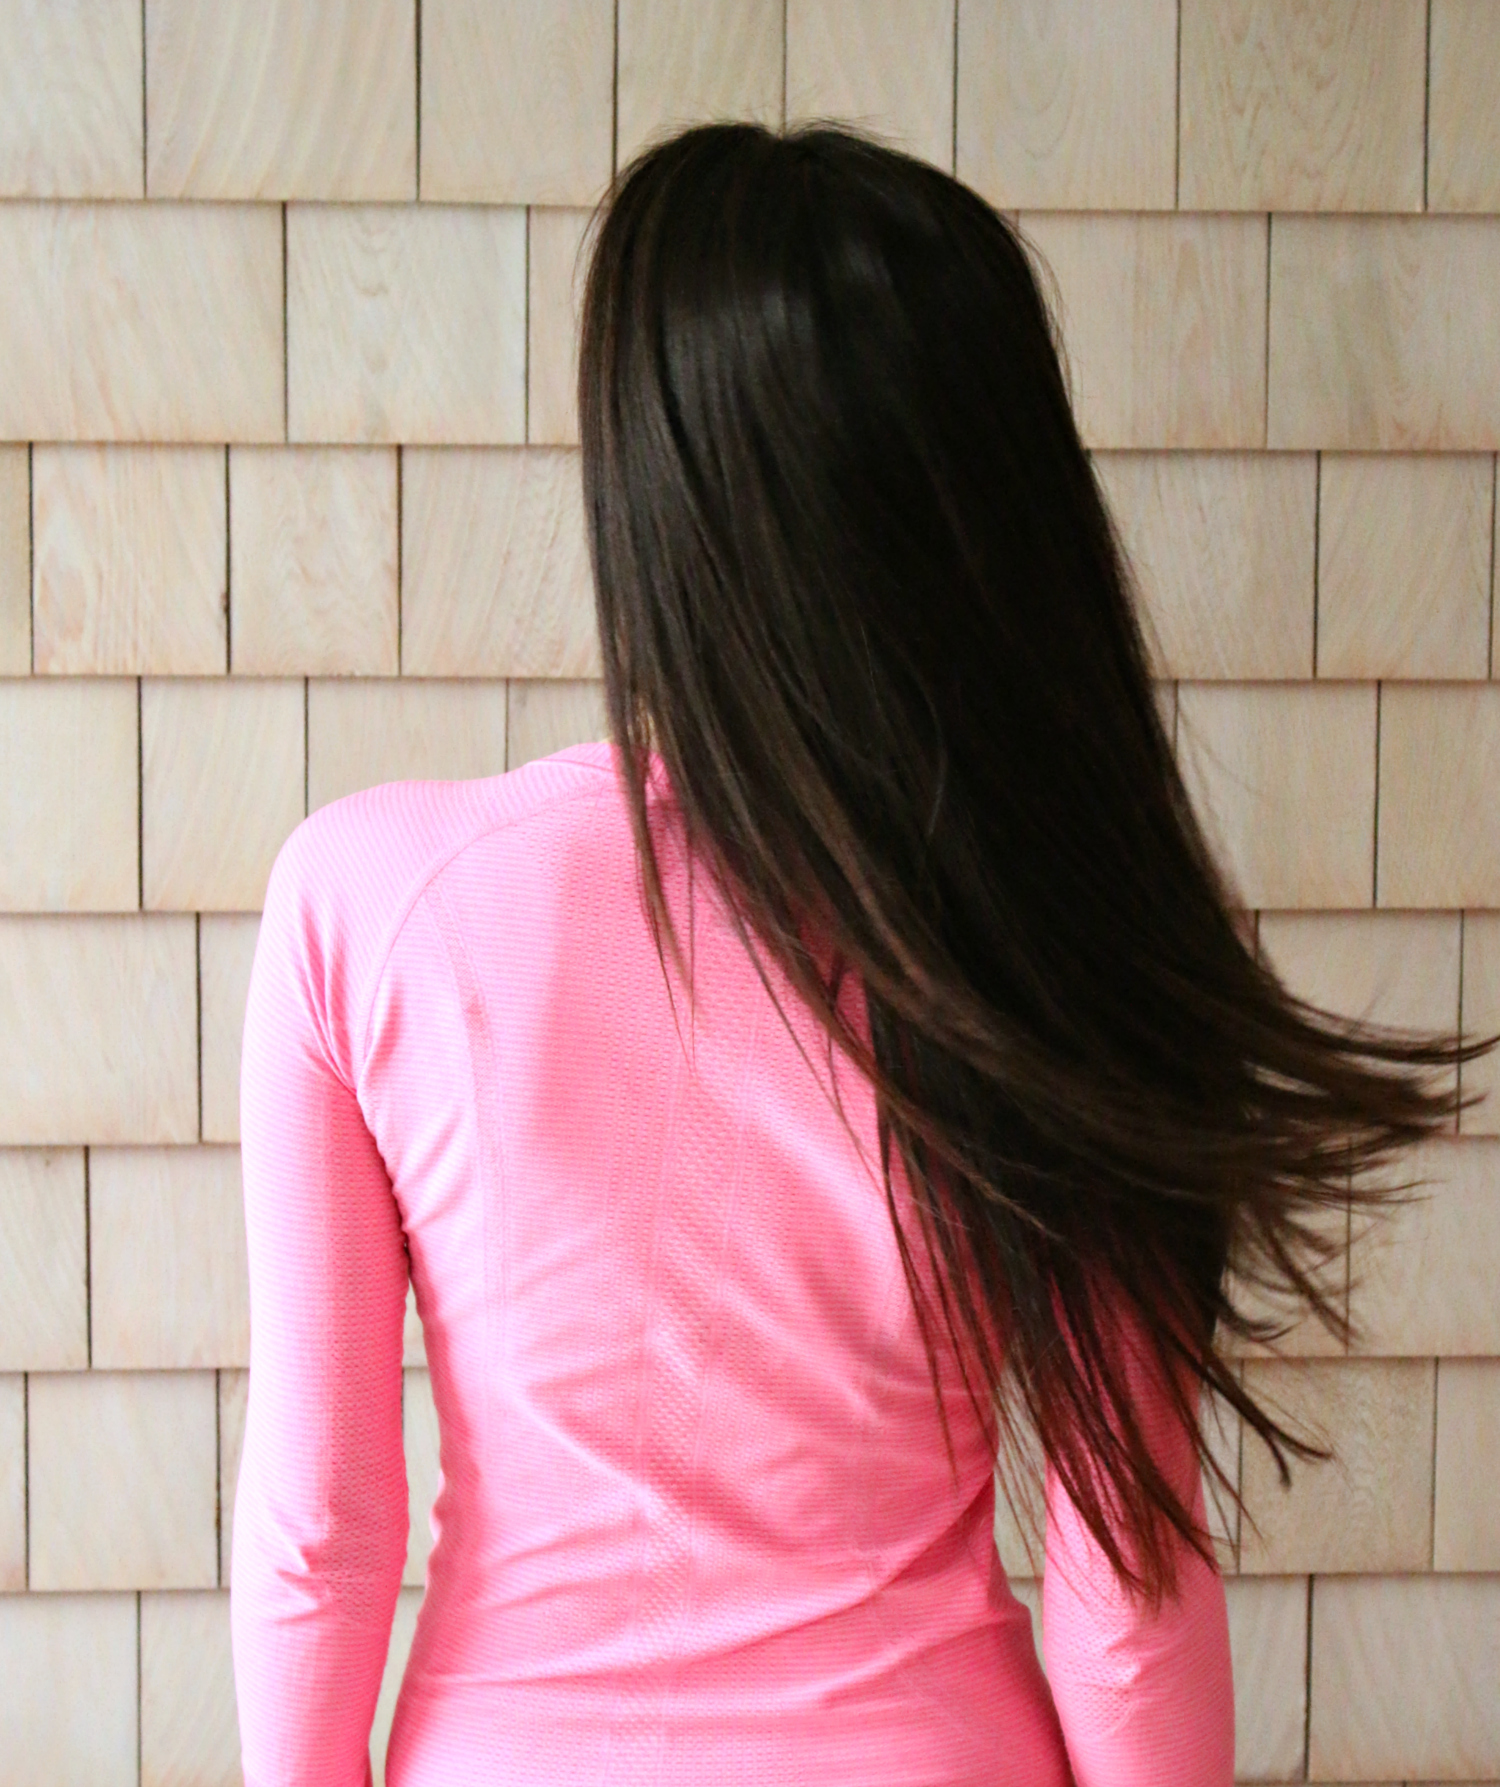 The long hair care routine for mitigating damage from styling with heat